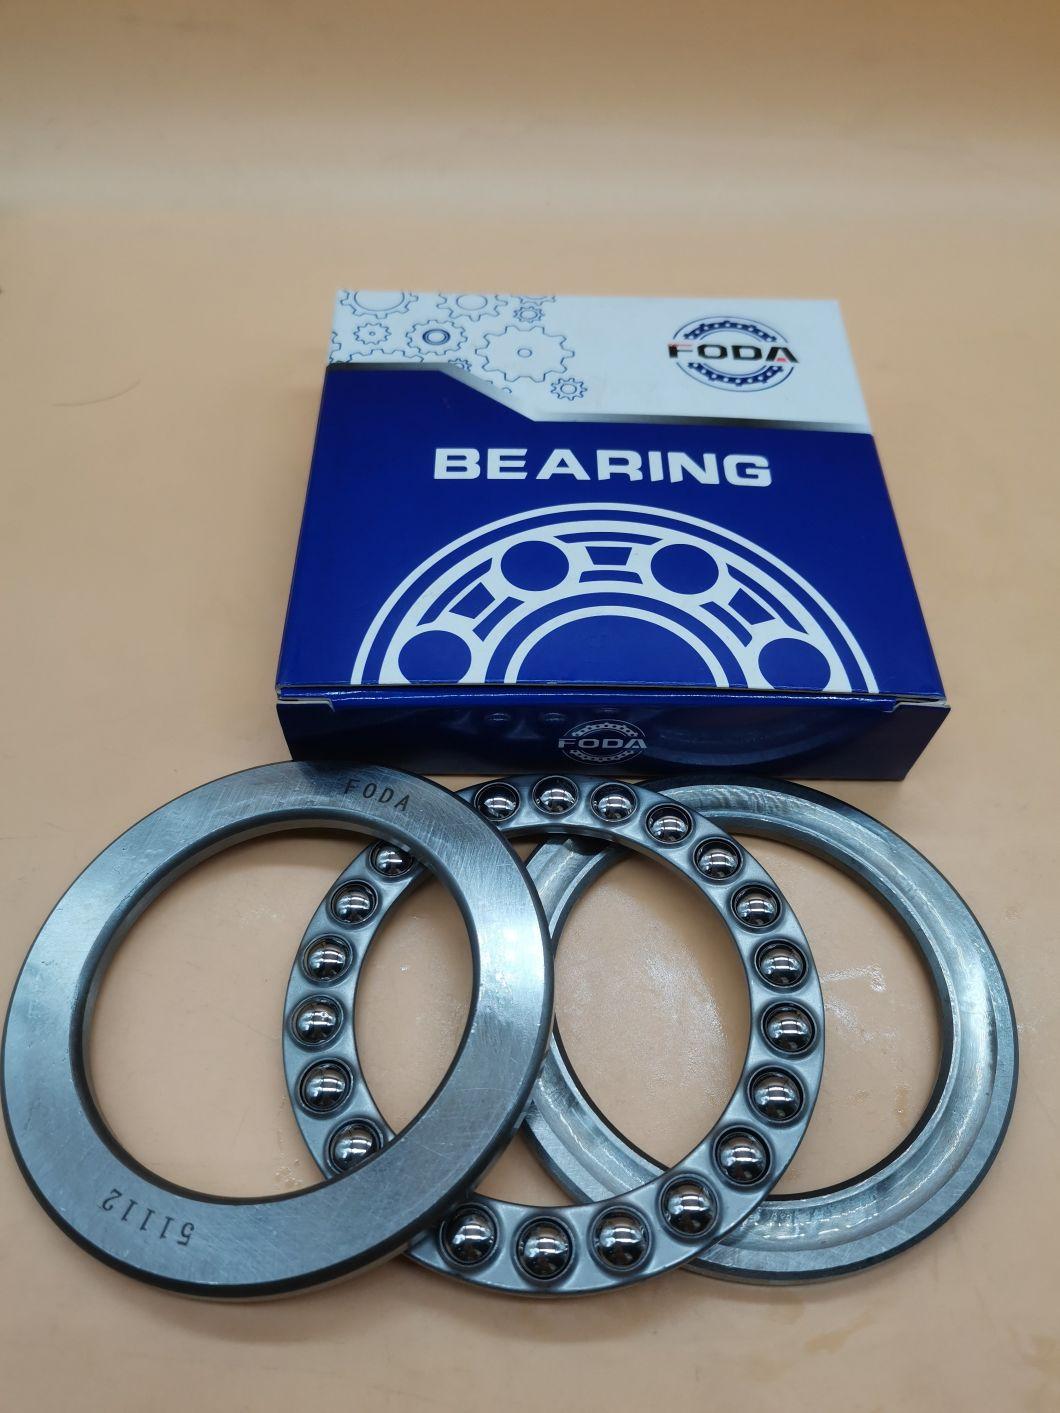 Unidirectional Thrust Ball Bearings/Low Speed Reducer/Foda High Quality Bearings Instead of Koyo Bearings/Thrust Ball Bearings of 51408